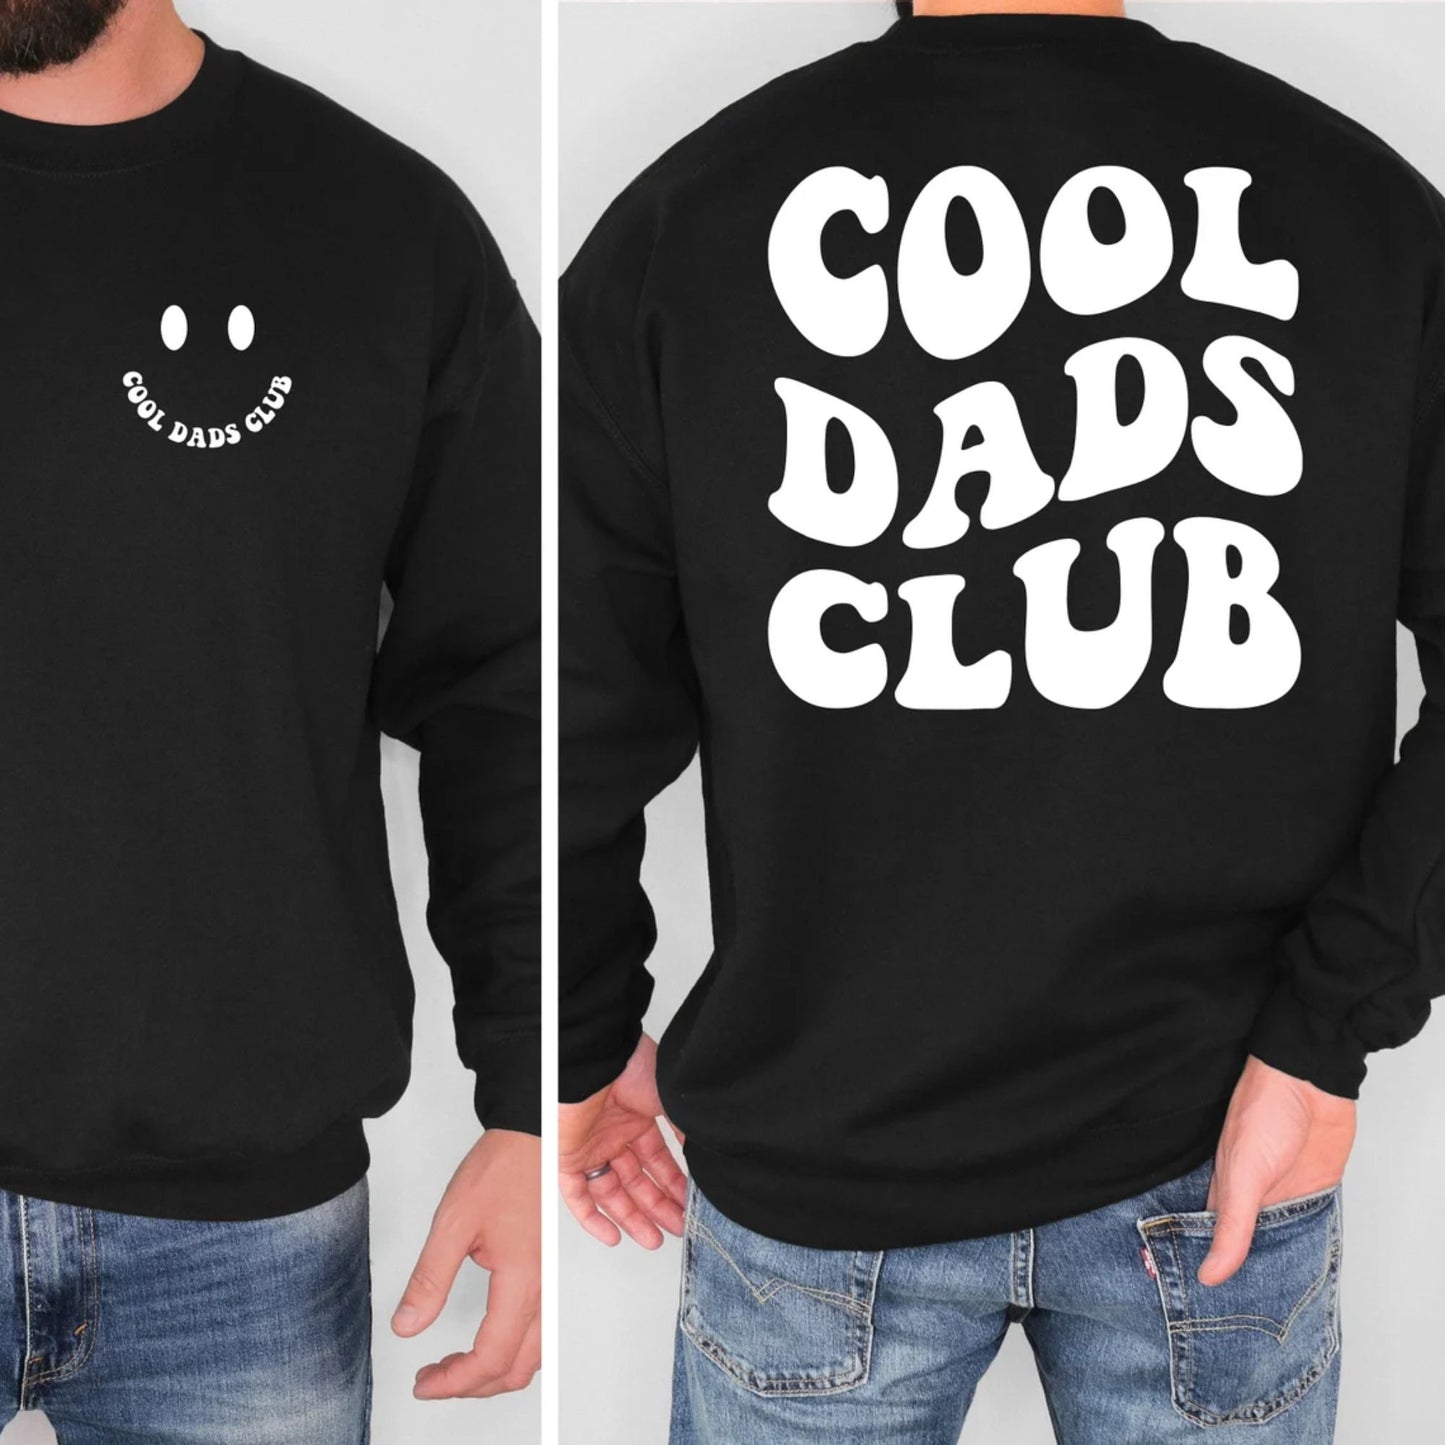 Cool Dads Club Shirt - Cool Dads Gift